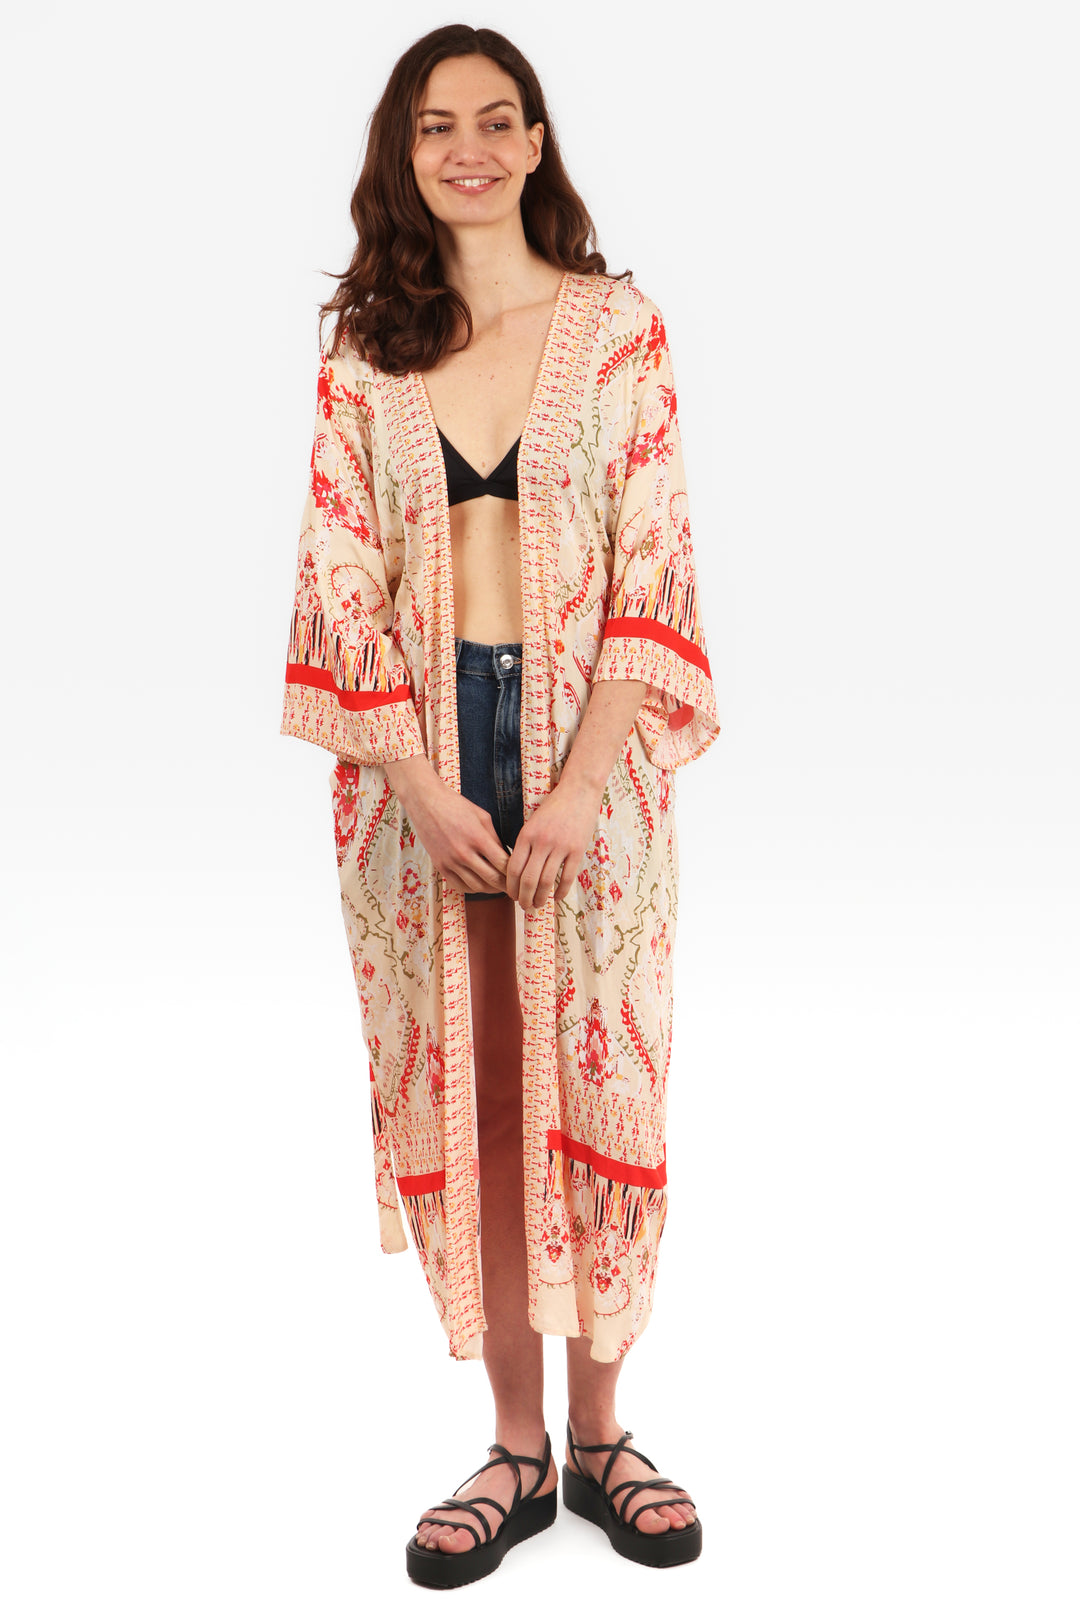 model wearing a midi length open front kimono robe with an ornate cream and pink mandala print pattern and 3/4 sleeves 